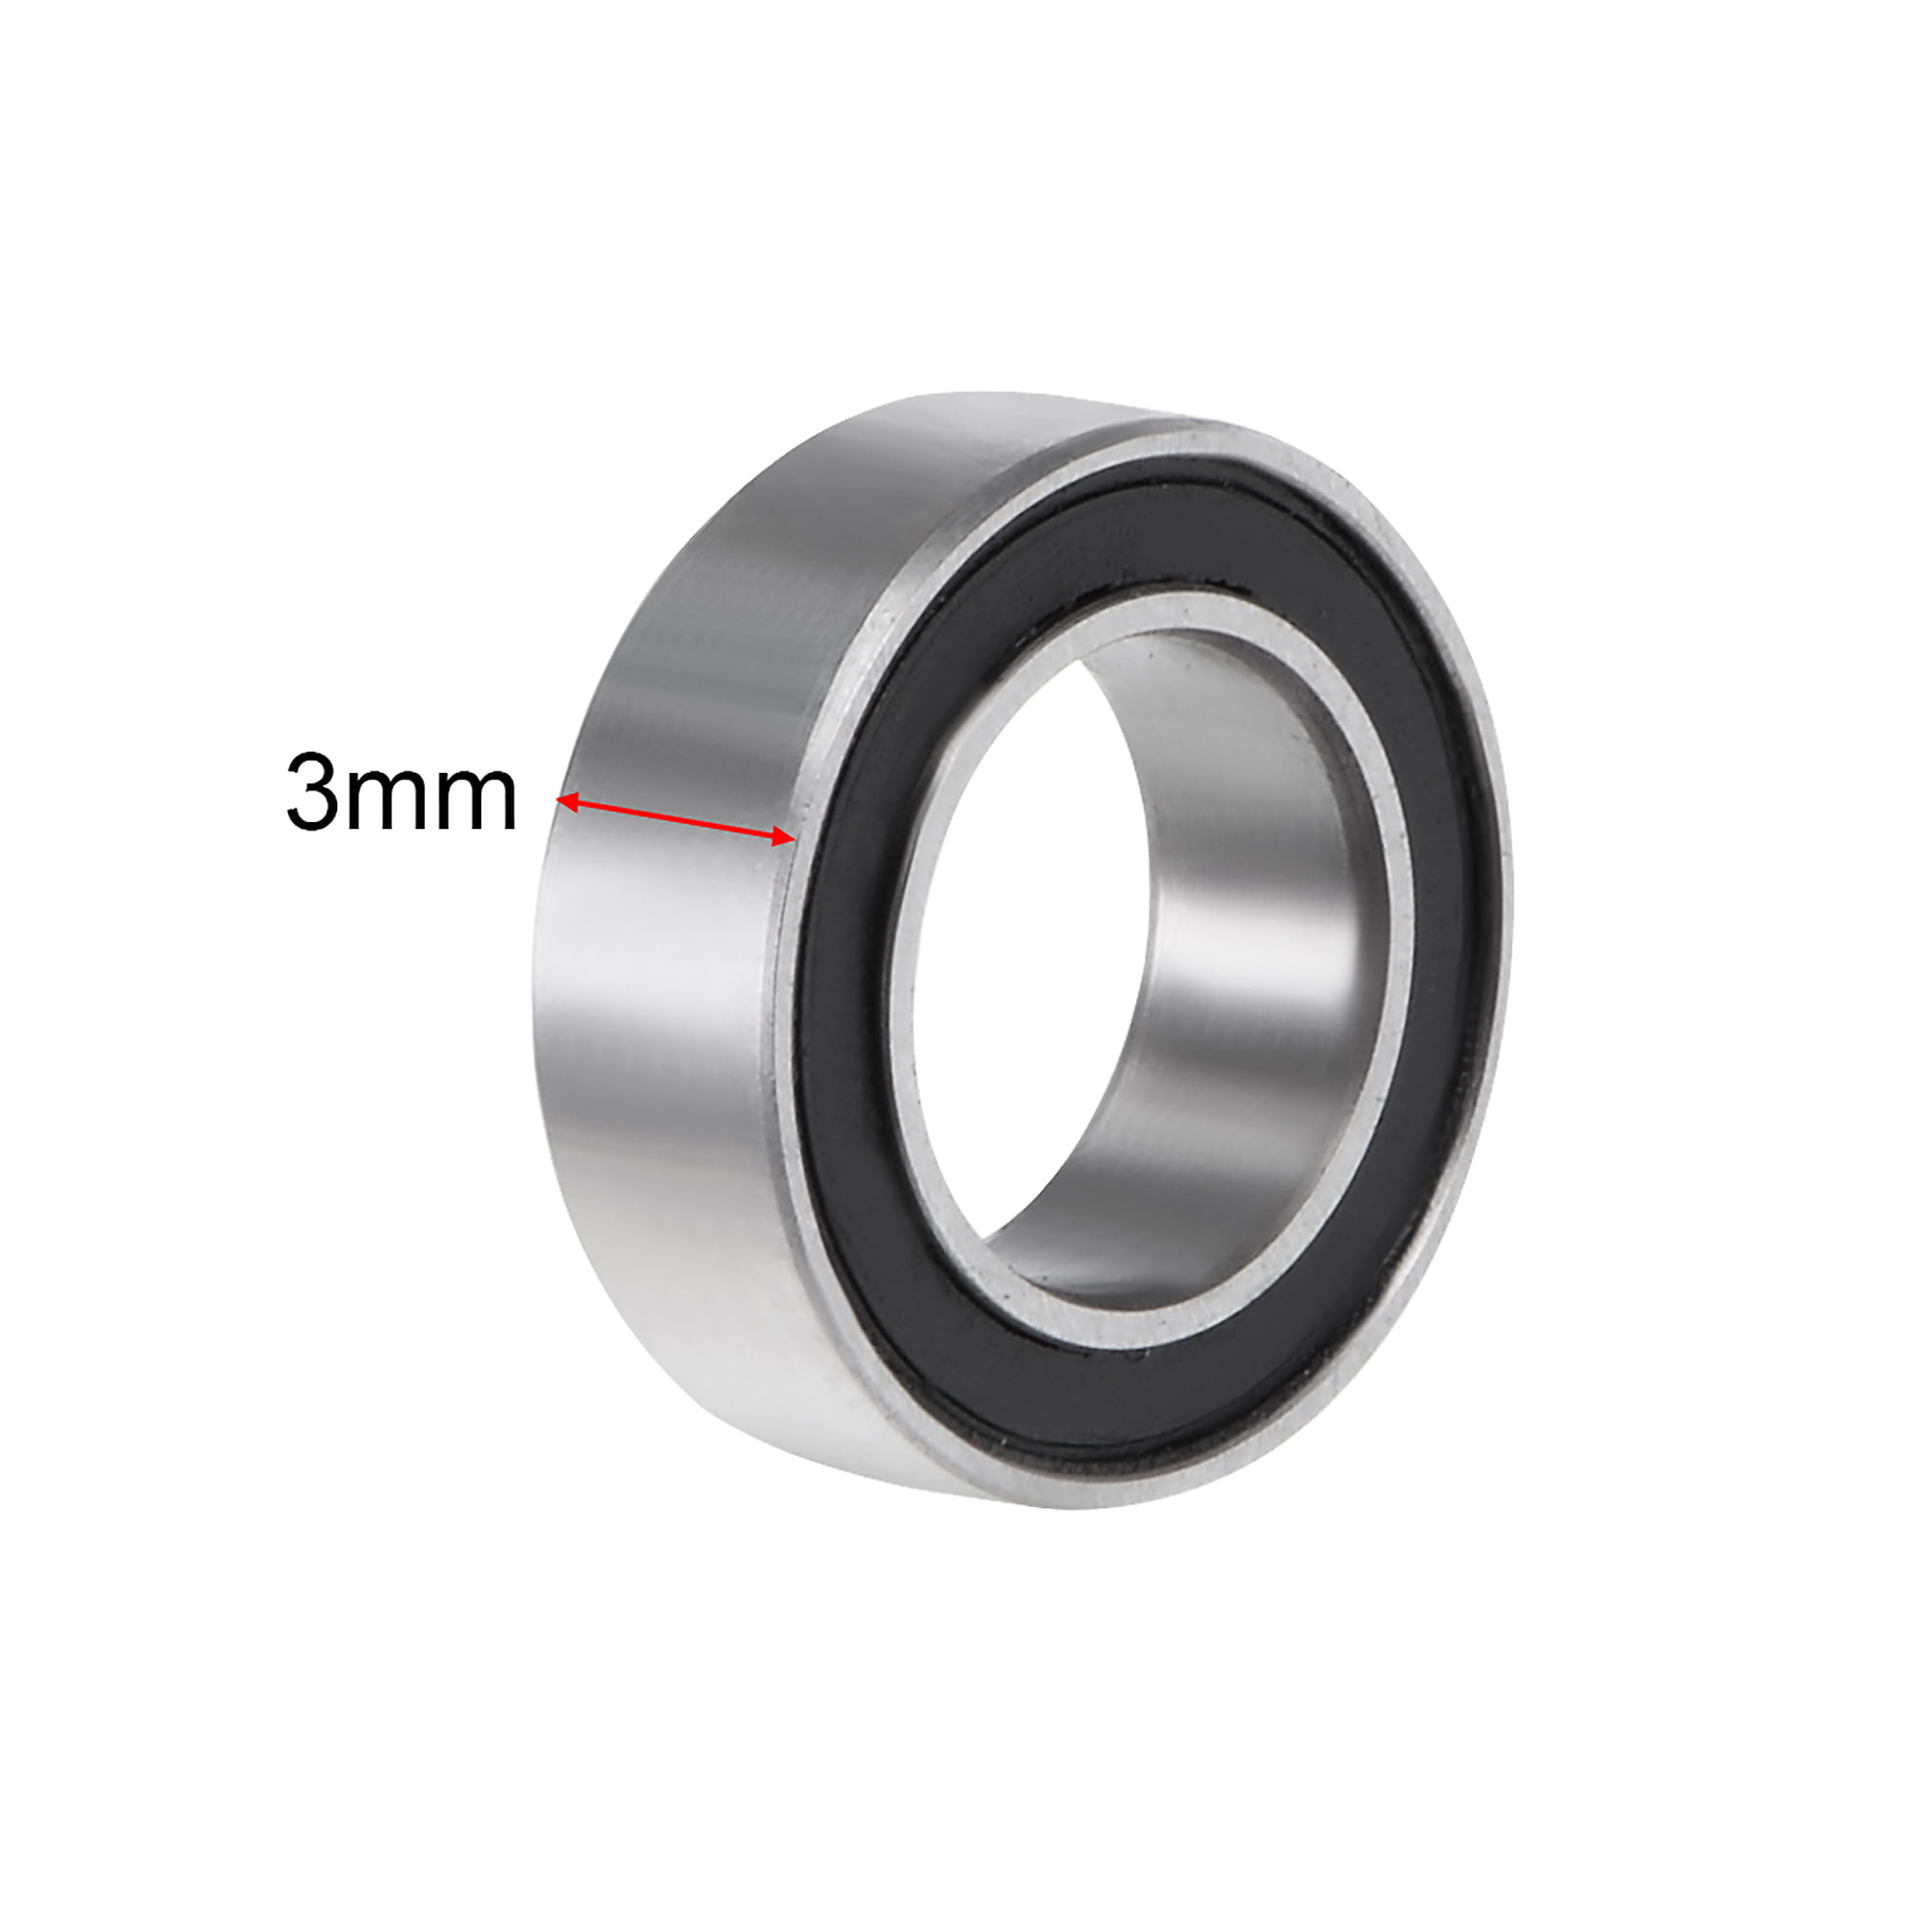 MR106-2RS  6x10x3 MM Rubber Bearings 2